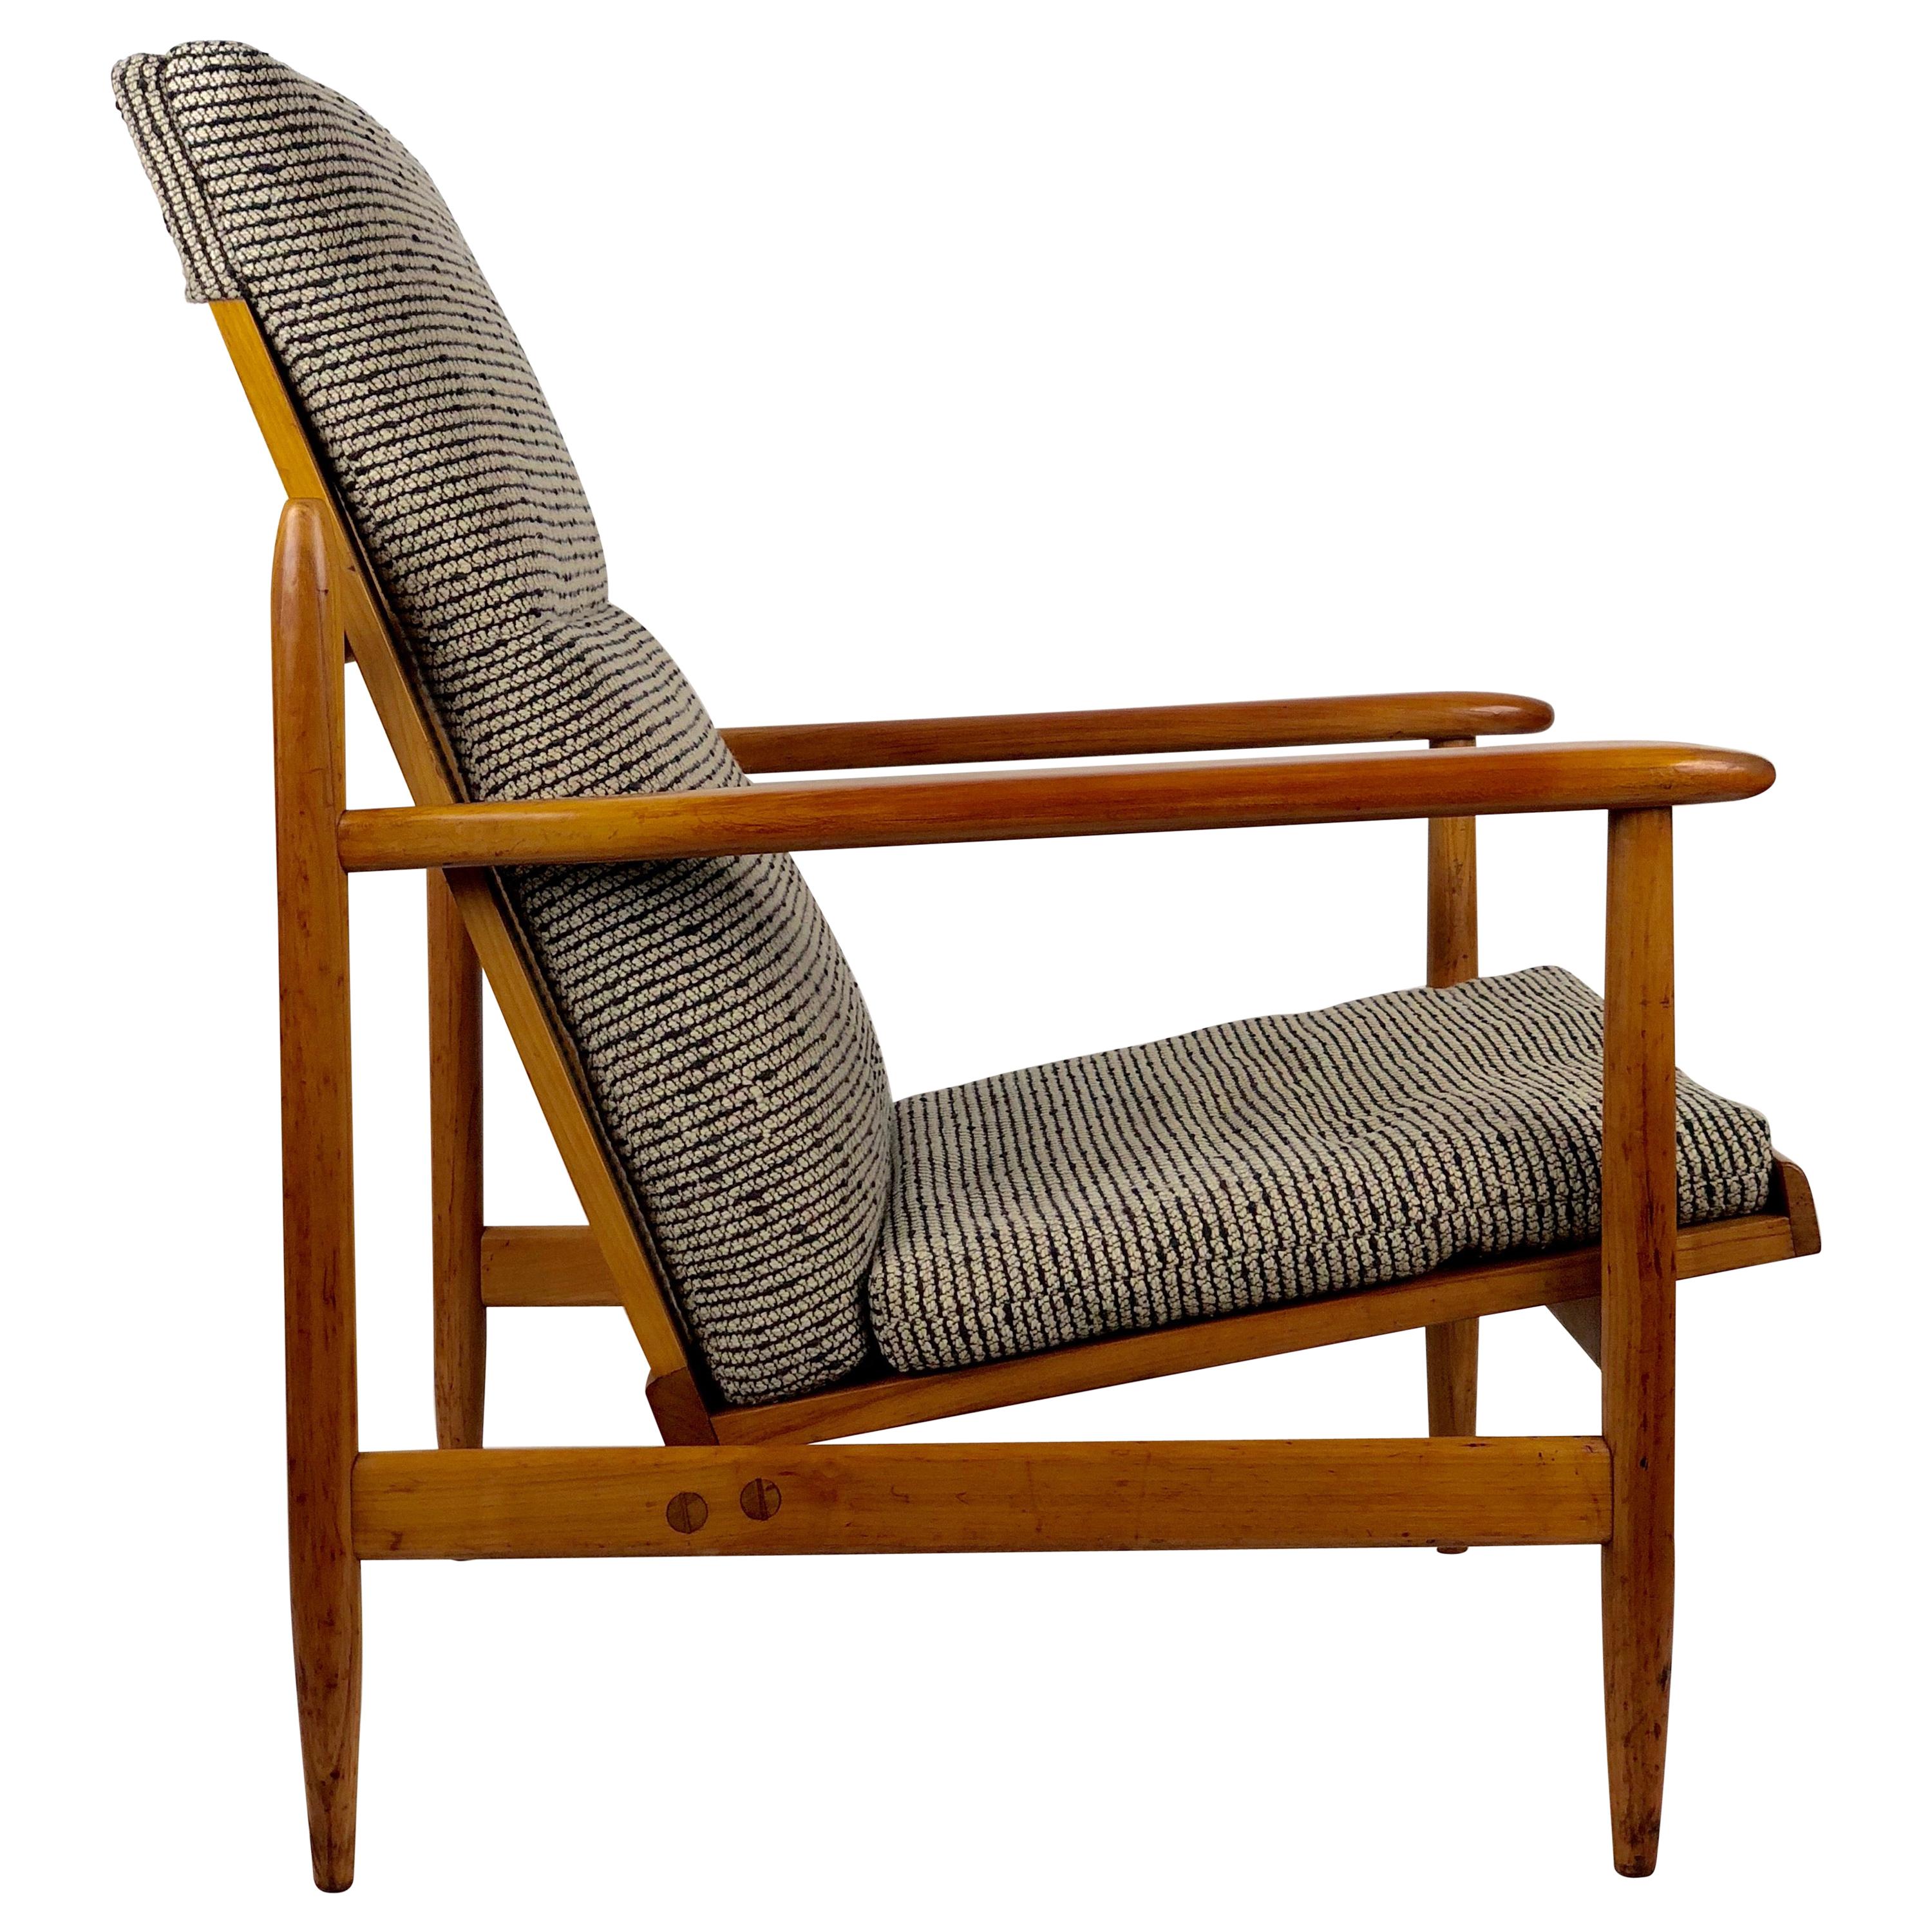 Elegant Armchair from Uluv in Cherry, 1960s, Czech Republic For Sale